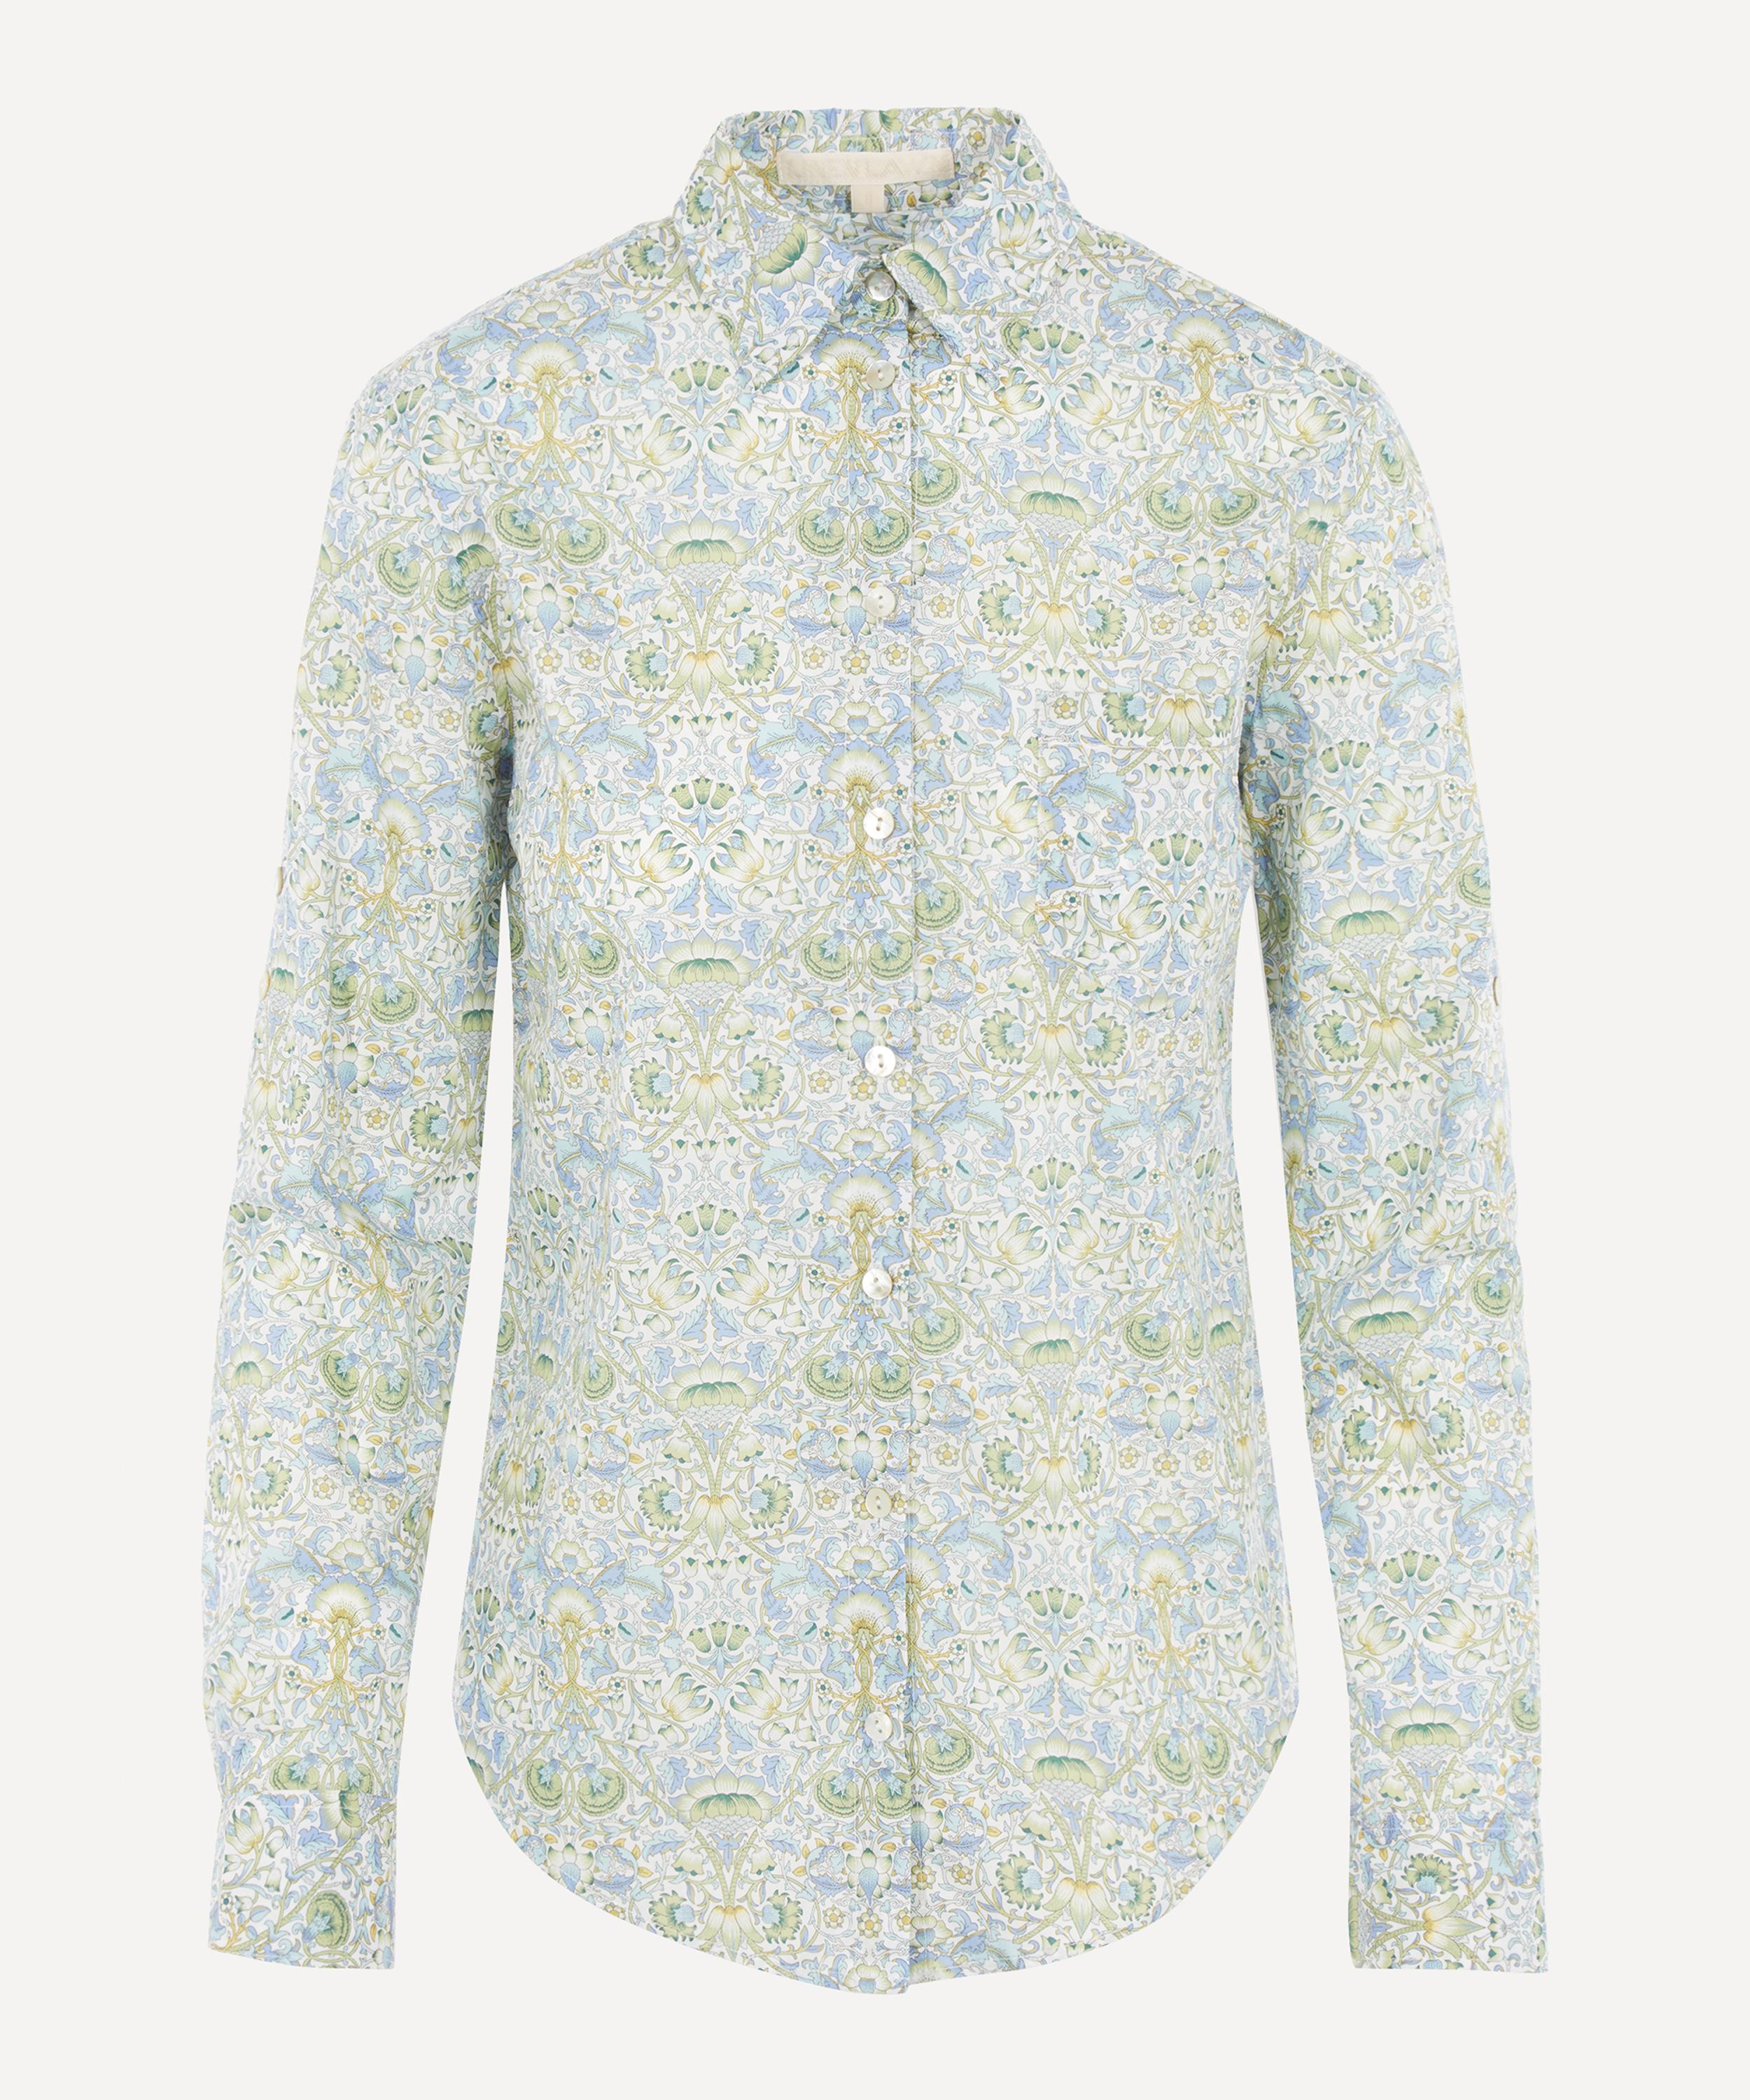 Liberty - Lodden Tana Lawn™ Cotton Bryony Shirt image number null